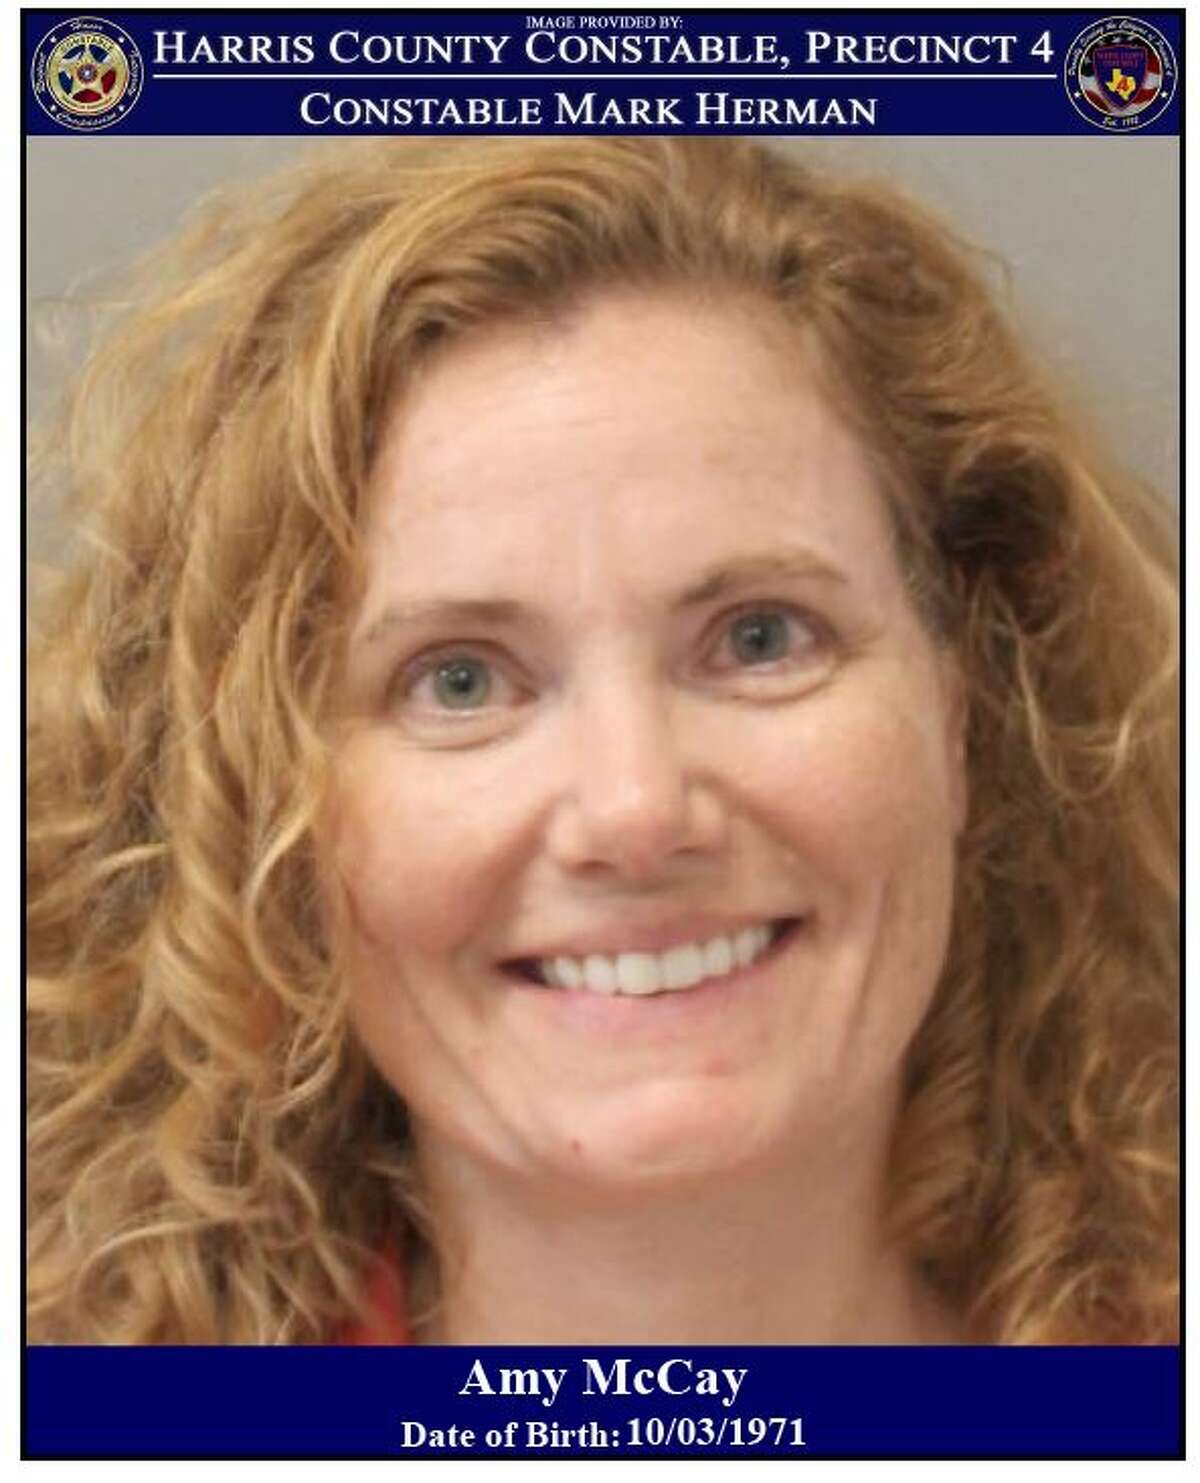 Amy McCay, 49, was arrested after allegedly refusing to wear a mask, coughing on fellow customers and shoving a deputy at Houston Premium Outlets.